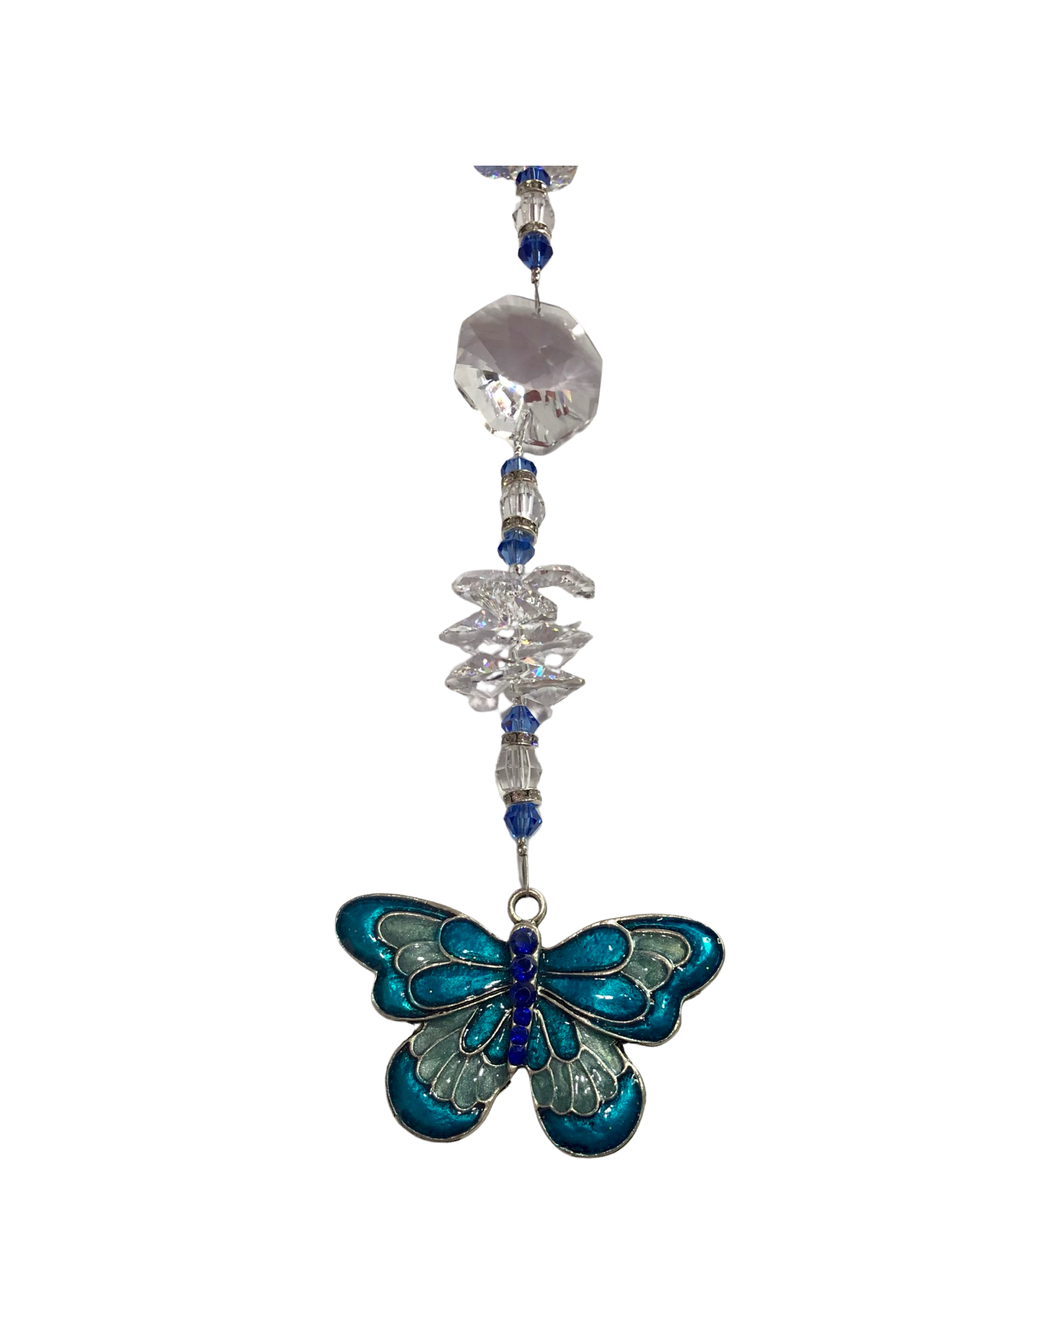 Butterfly - Blue suncatcher decorated with crystals and Lapis Lazuli gemstones